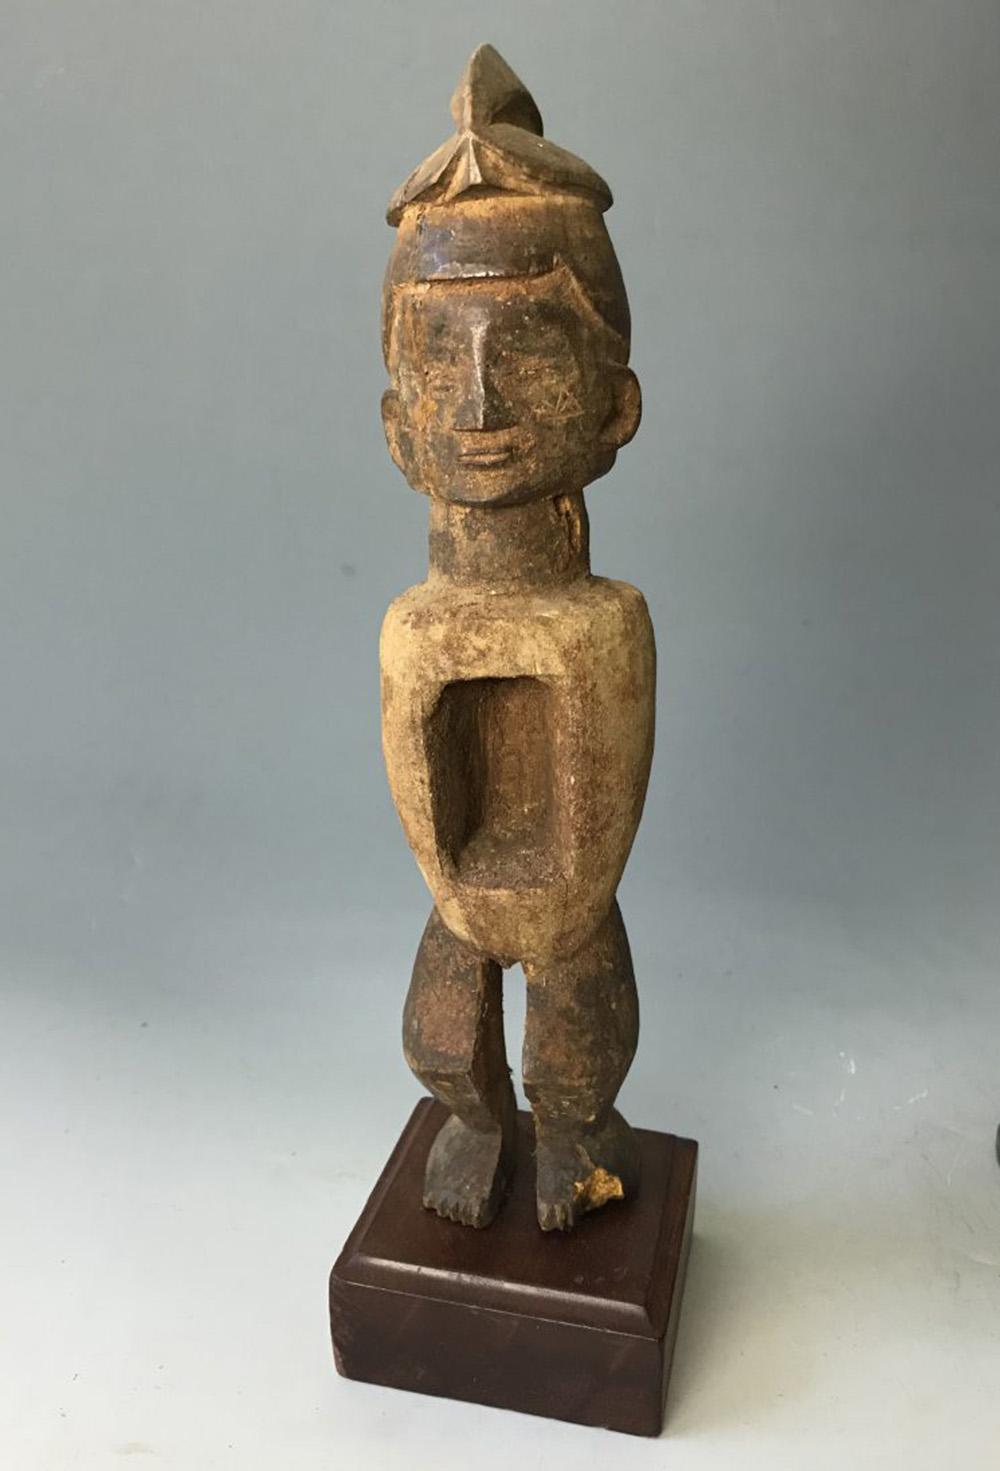 Fine Teke figure Congo Schleger Ex Sothebys
A Teke Magic standing figure
Congo early 20th century,
Ex Sotheby's July 1966, Ex Schleger collection
Measures: Height 25 cm, 10 inches.
Condition: minor age damage wear.